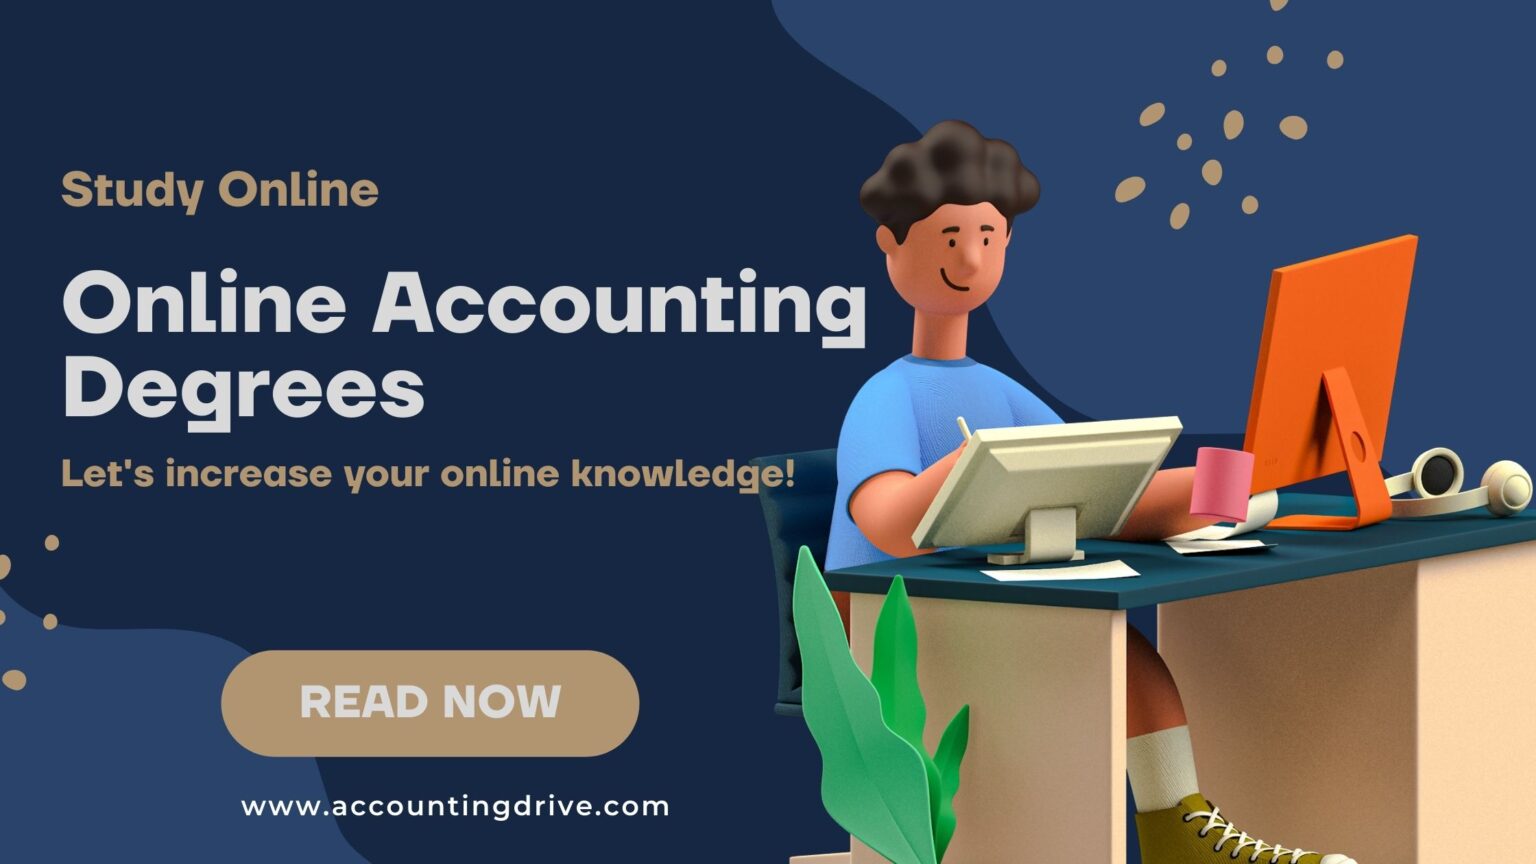 Online Accounting Degrees 1536x864 